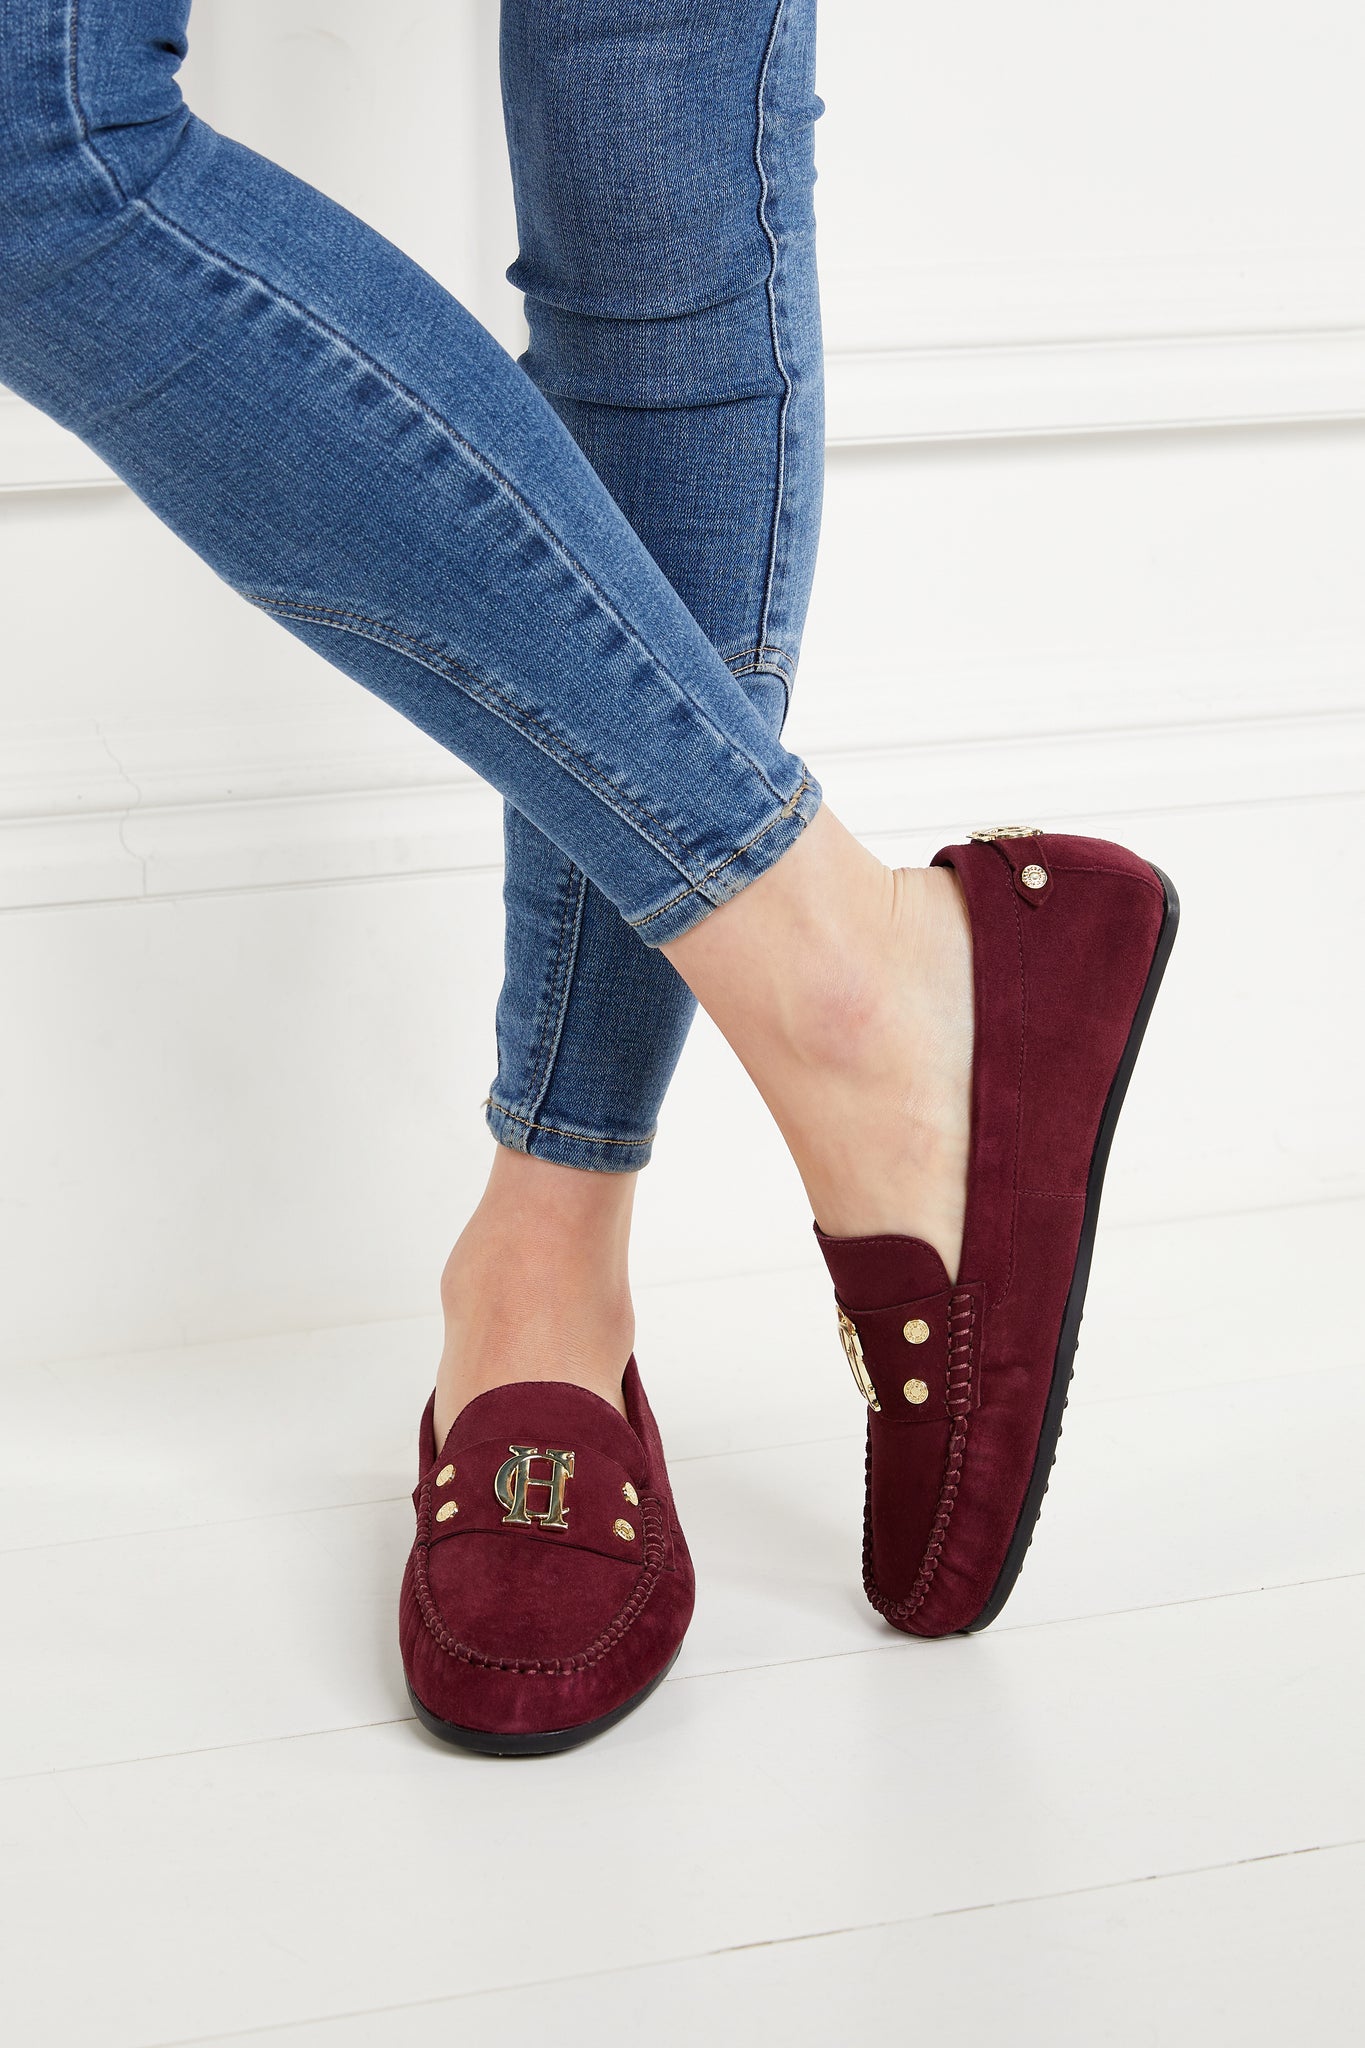 classic deep red suede loafers with a leather sole and top stitching details and gold hardware paired with skinny denim jeans